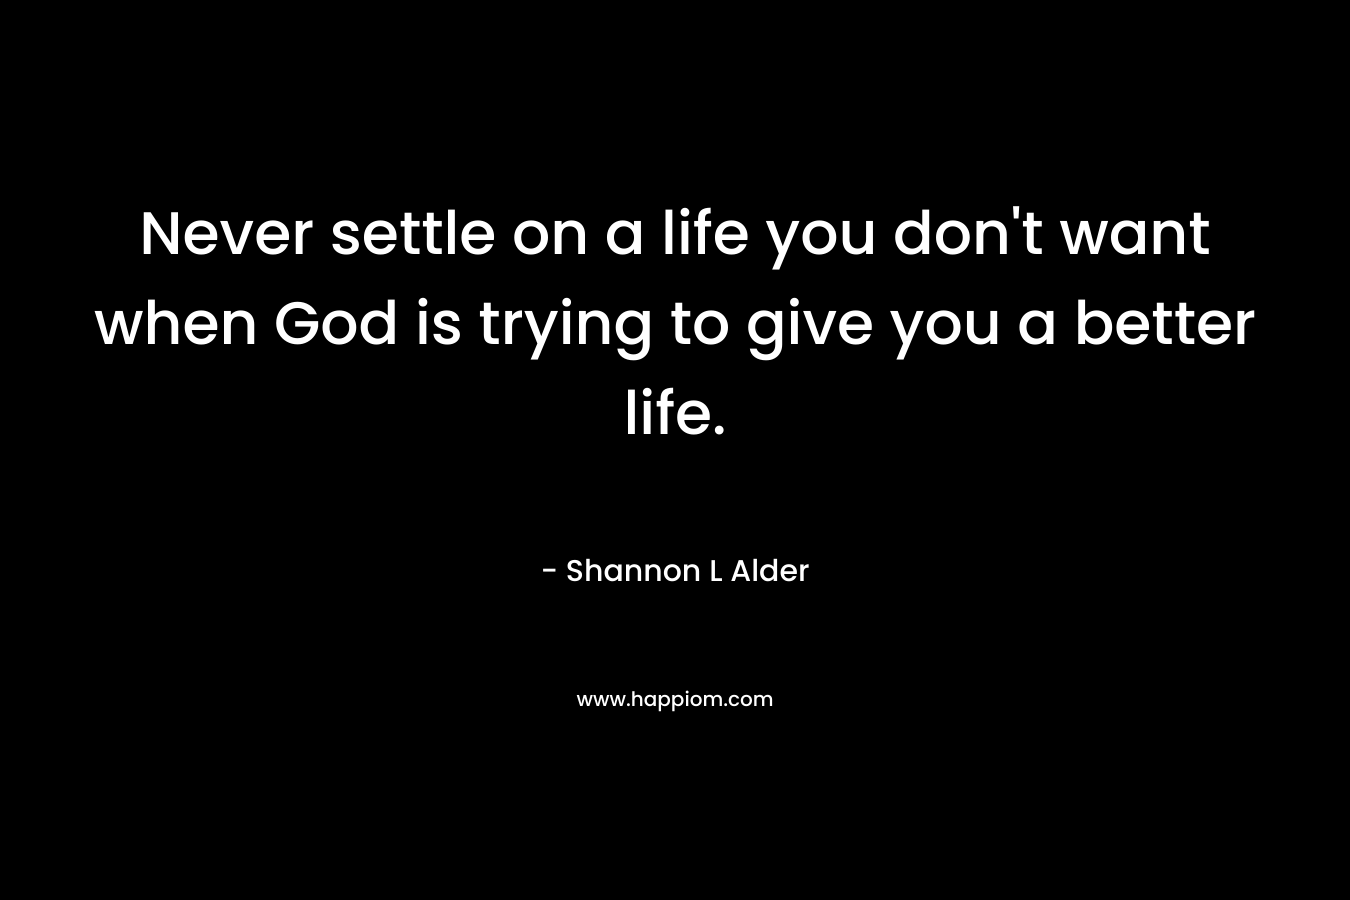 Never settle on a life you don't want when God is trying to give you a better life.